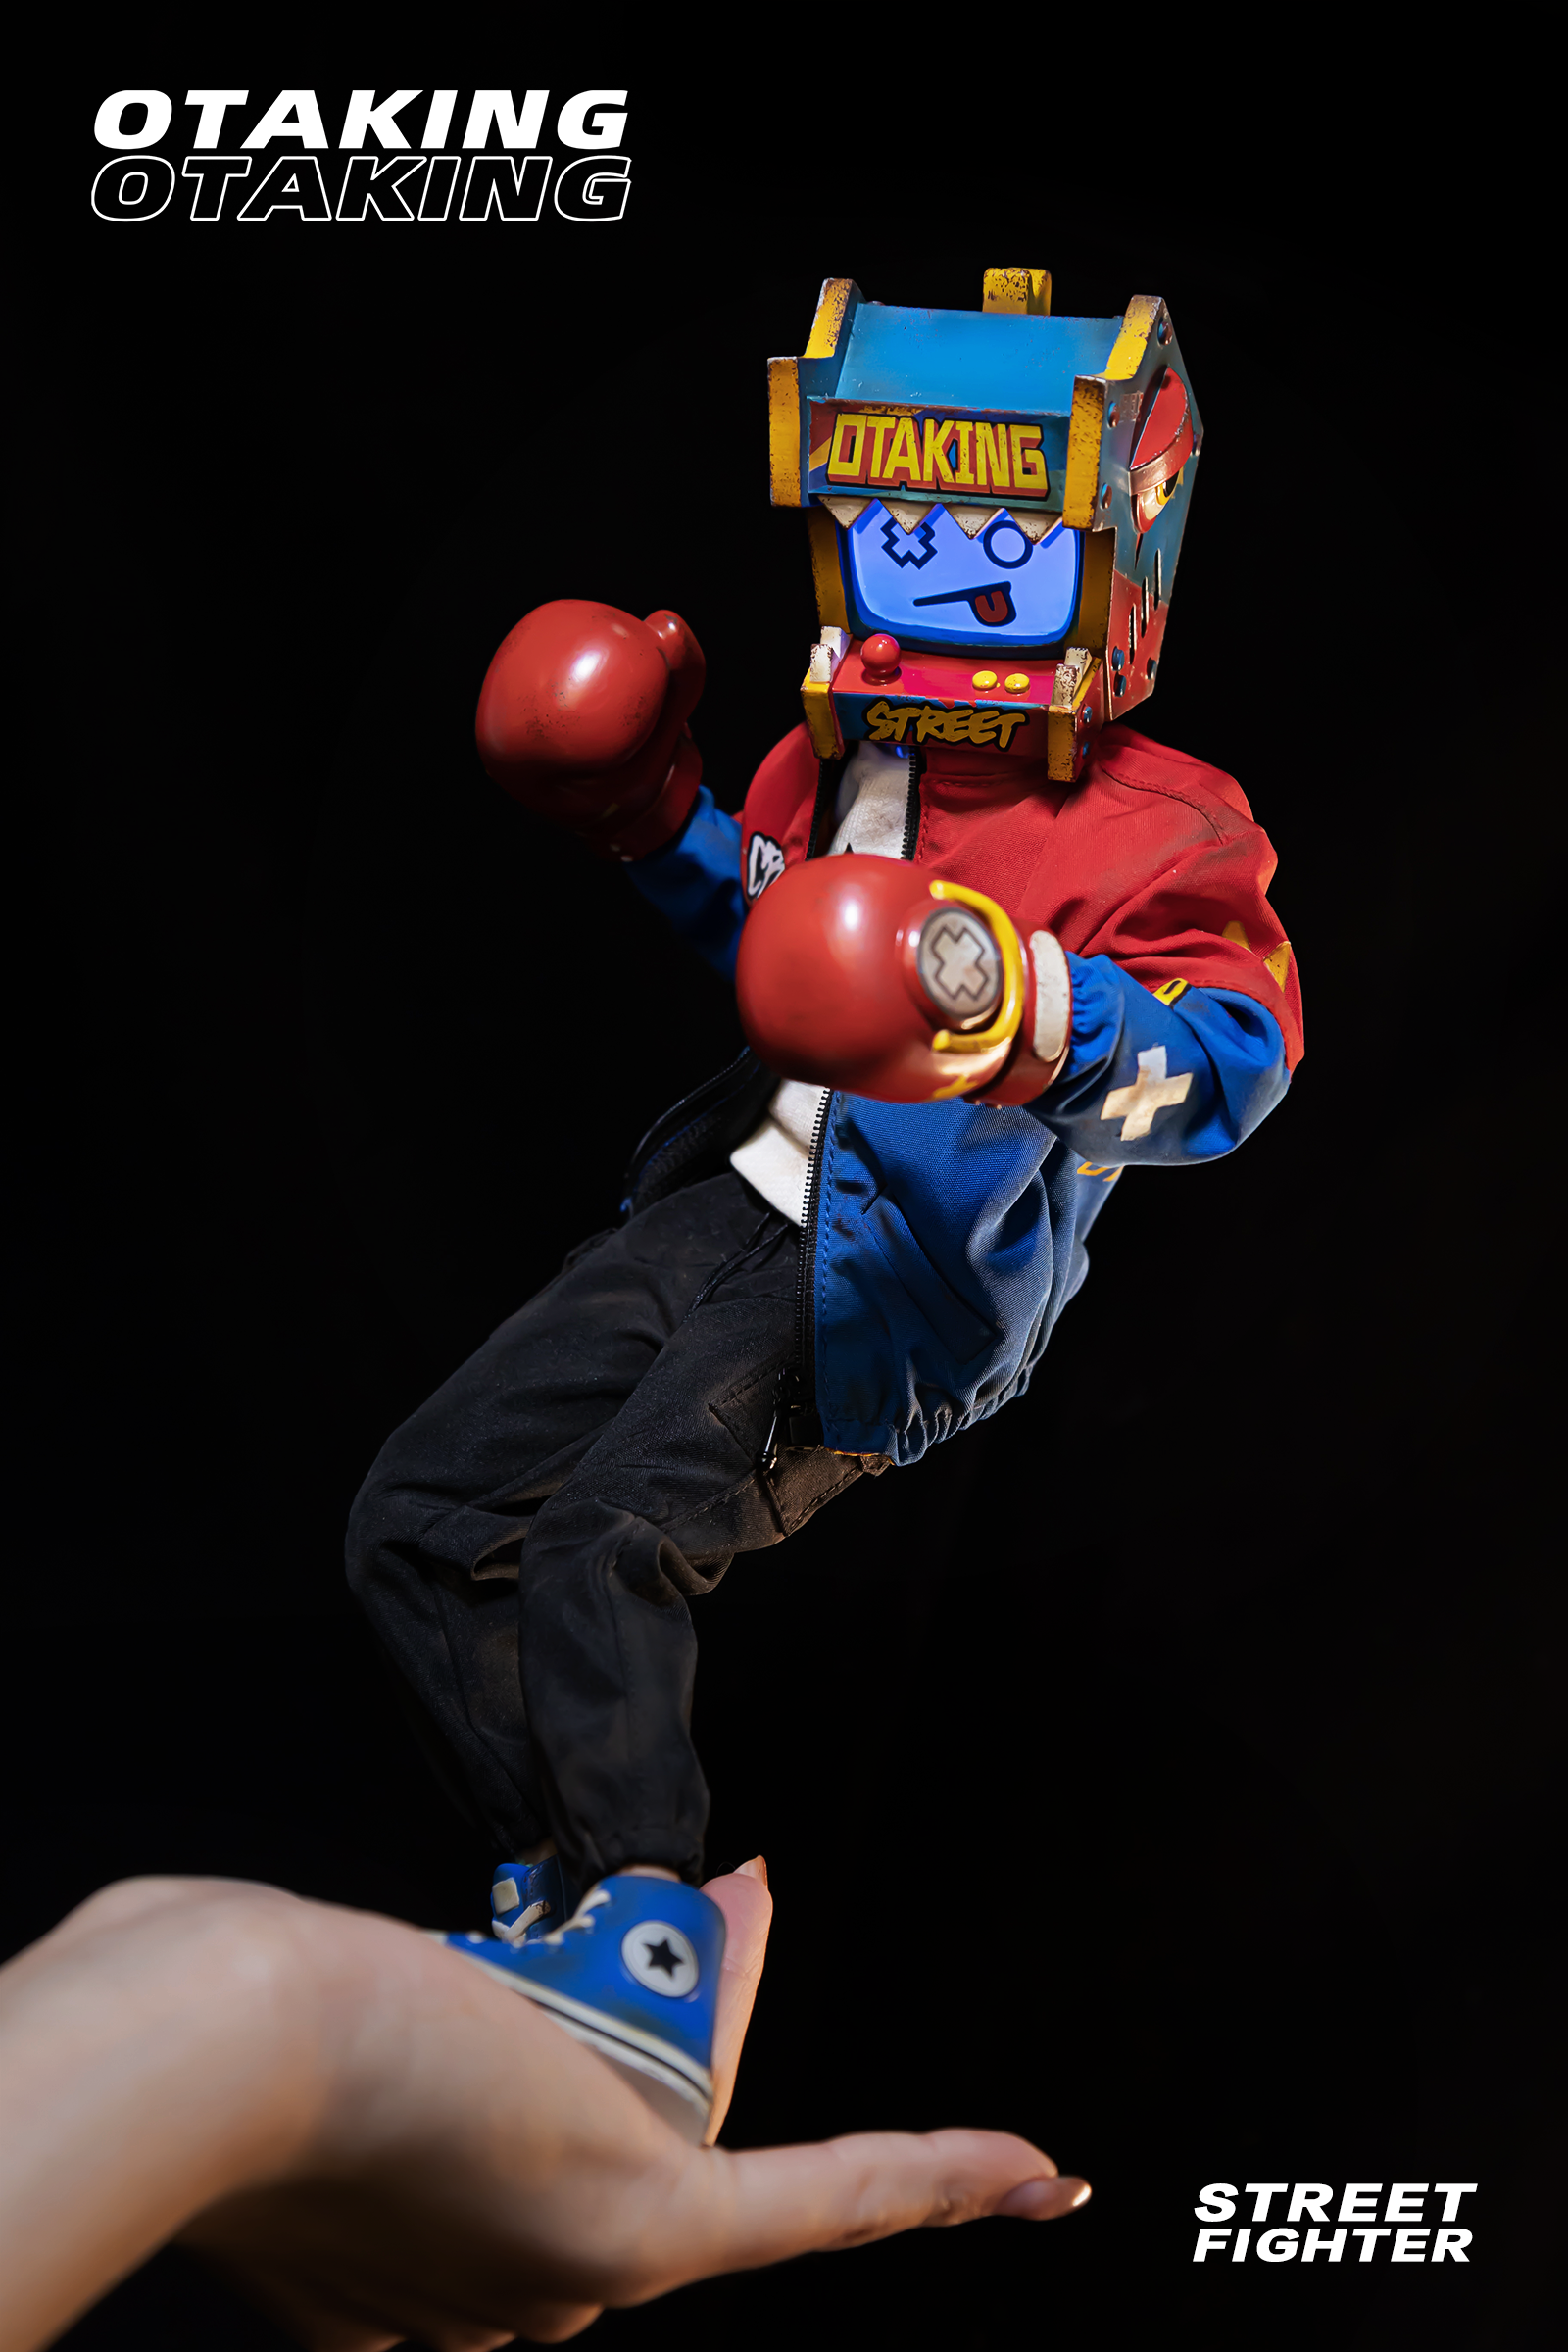 A hand holding a toy machine with a face, a small blue shoe, and a red boxing glove in the OTAKING - Street Fighter collection.